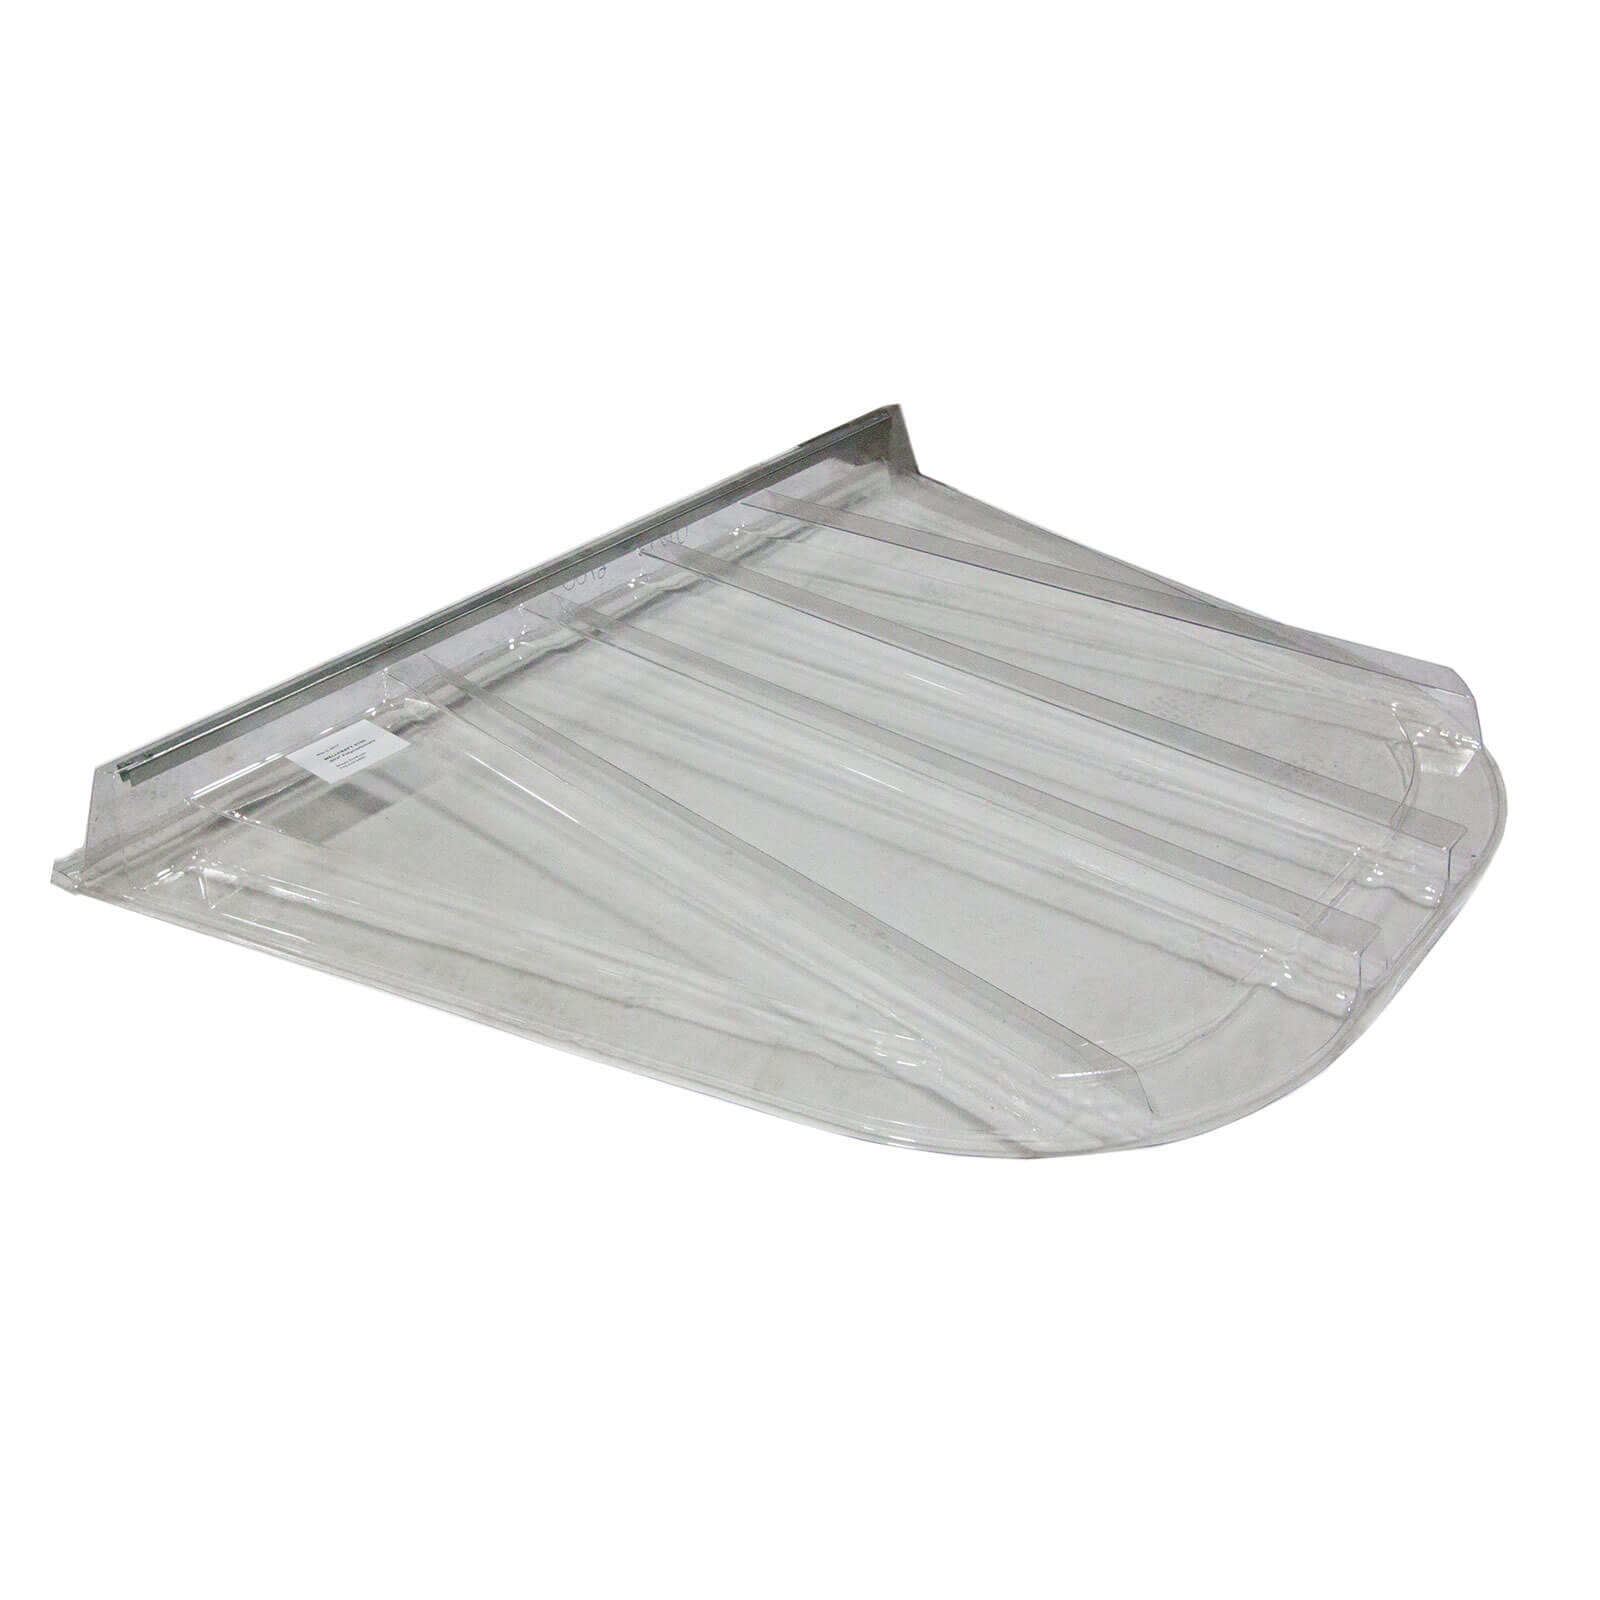 Modern Builders Supply - Wellcraft 6700 Well Cover